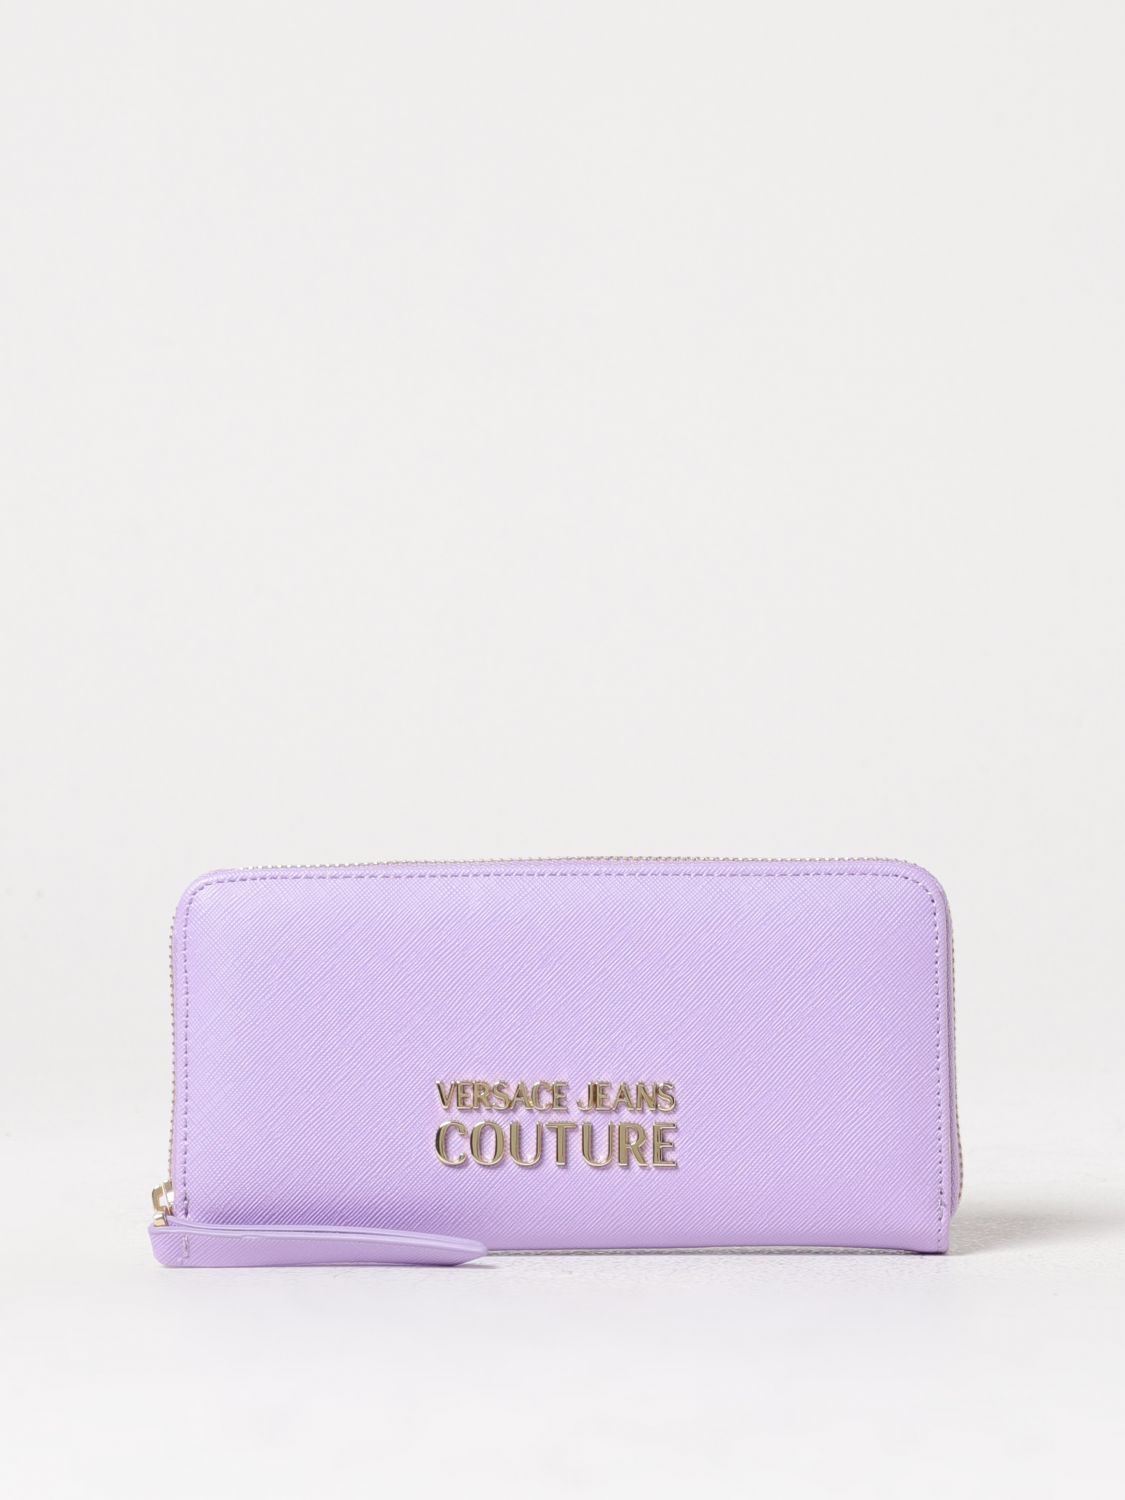 Versace Jeans Couture Wallet  Woman In Violet